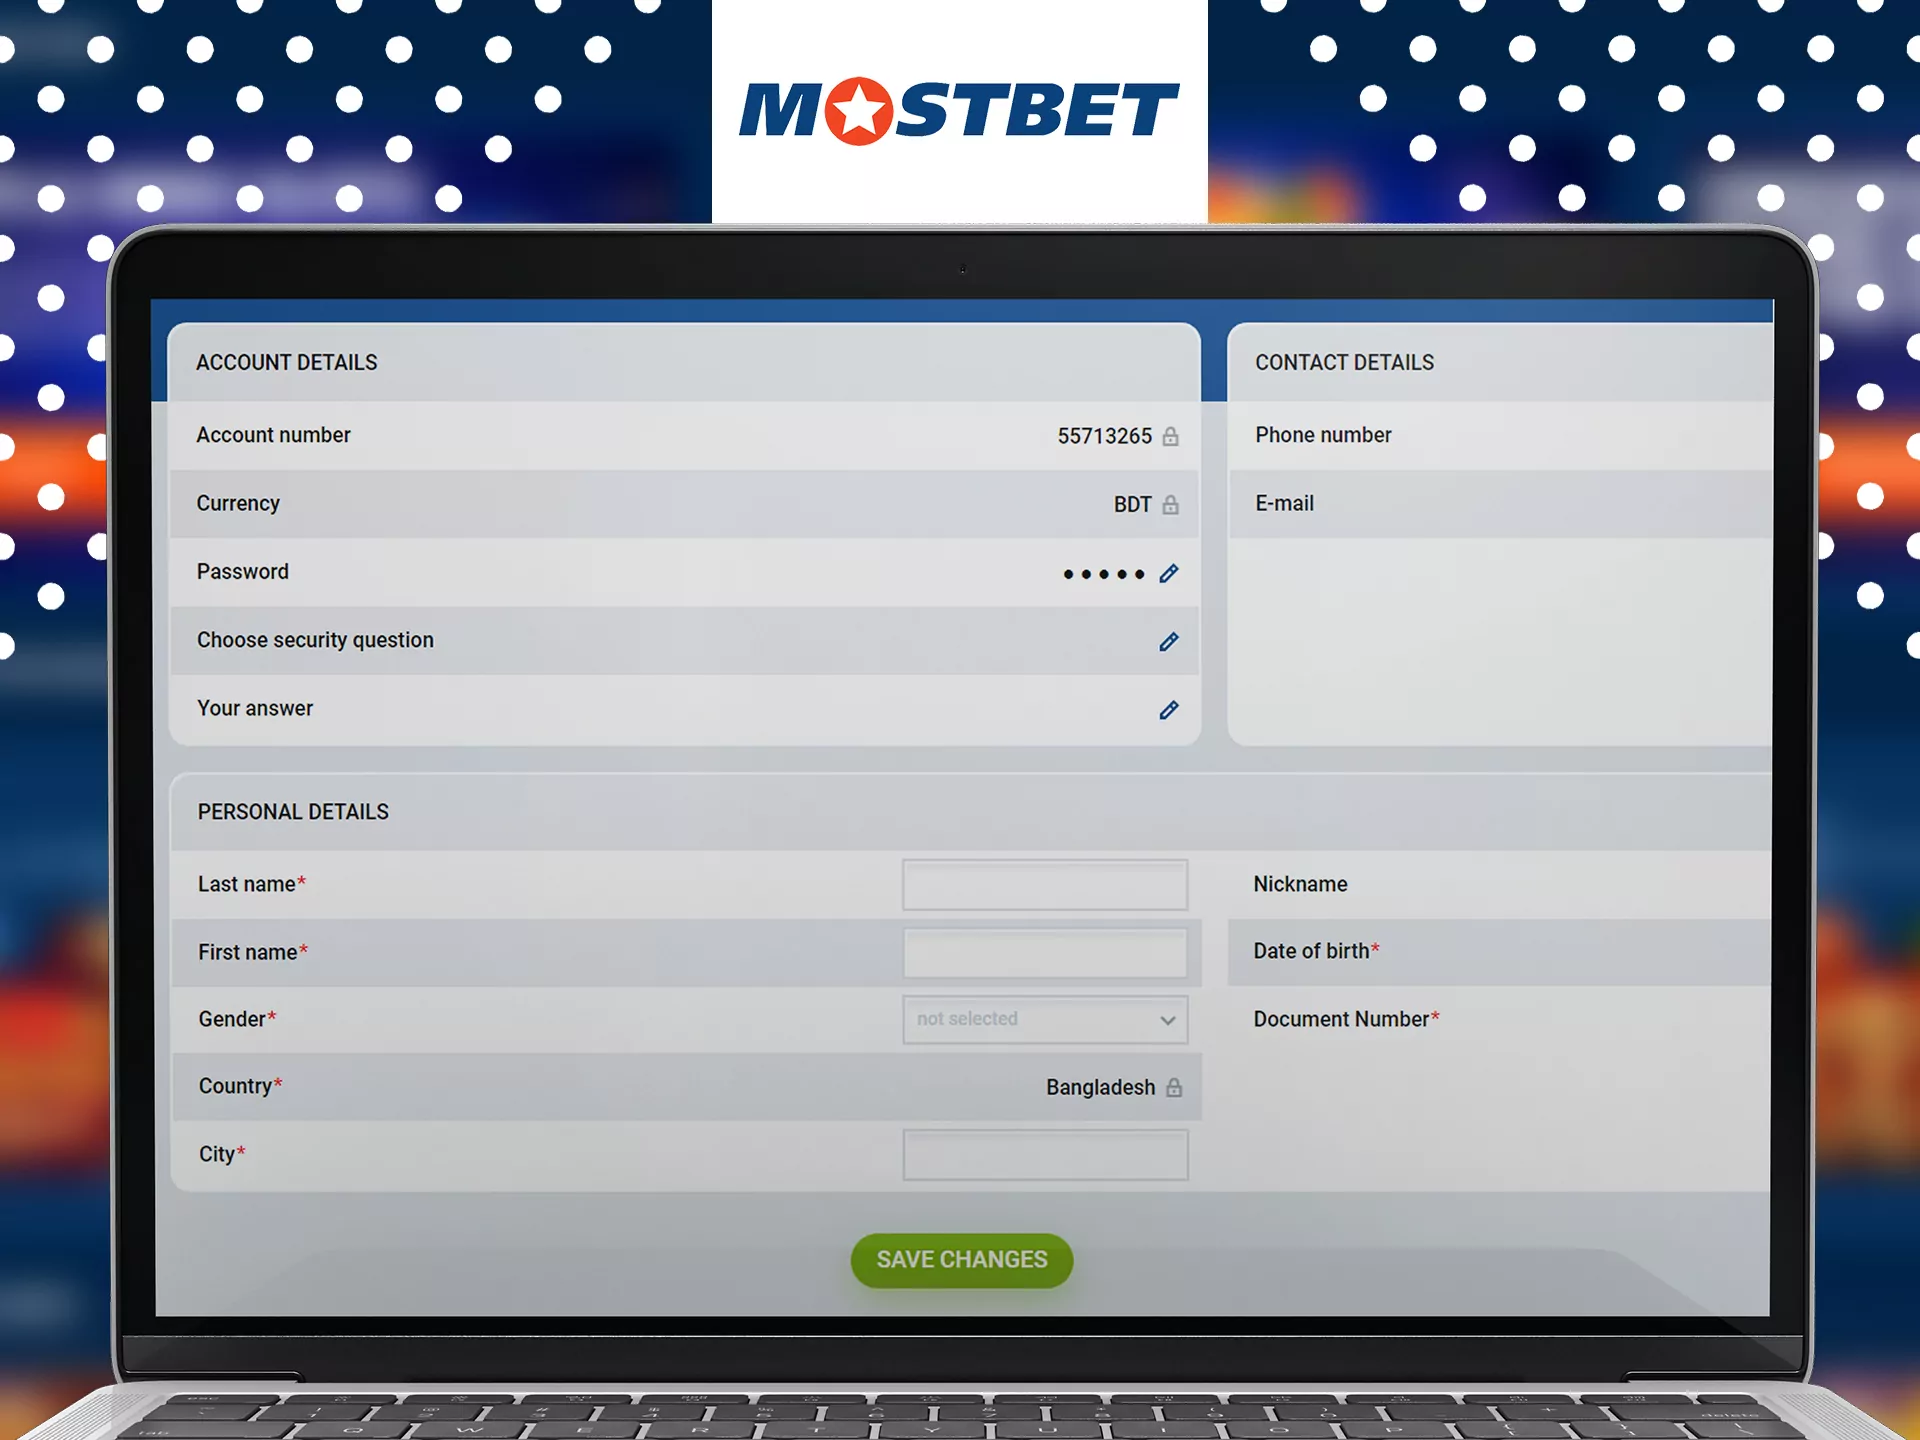 Attention-grabbing Ways To Mostbet UZ: Get a signup bonus and more